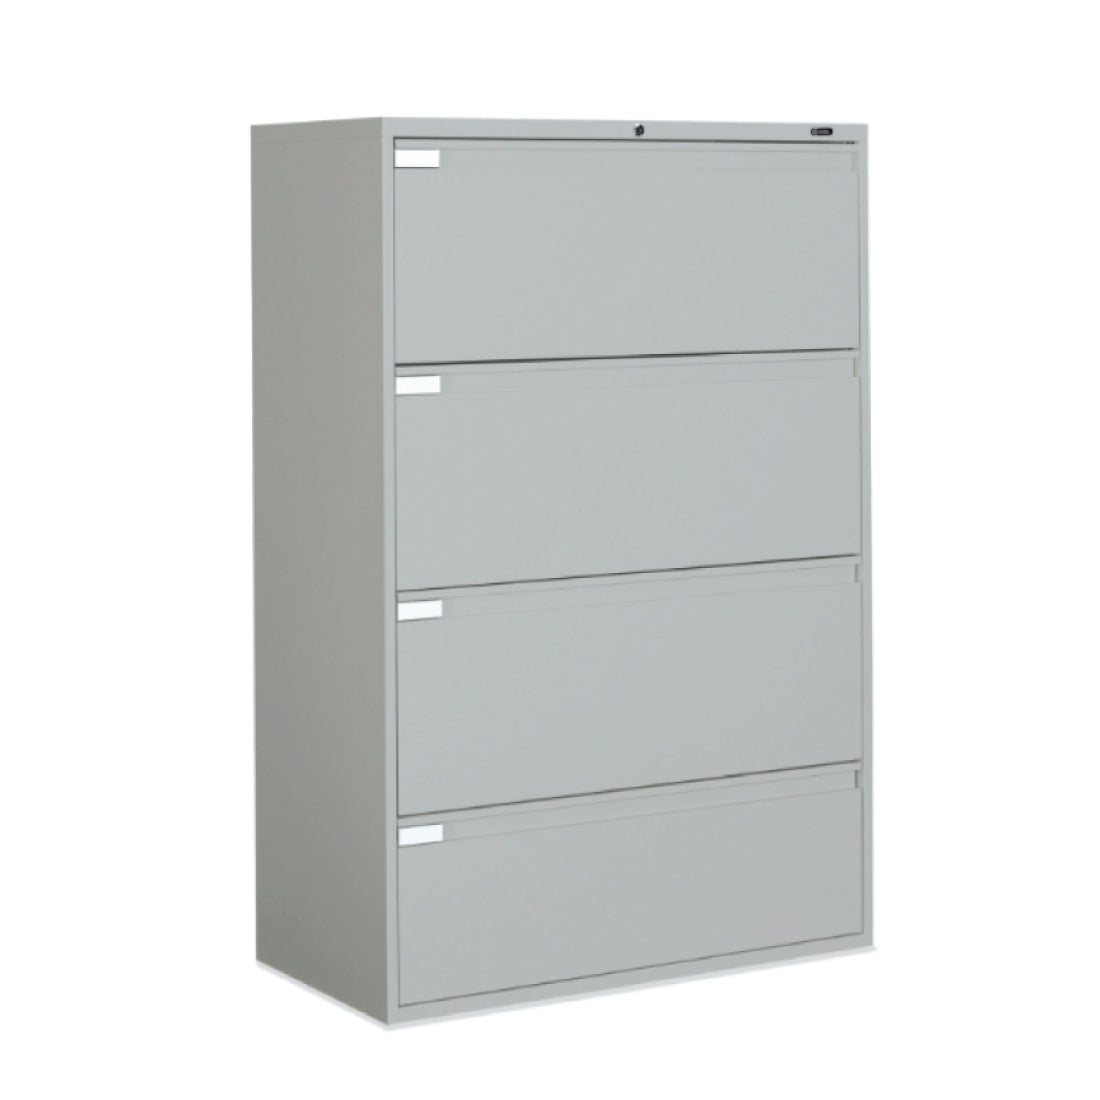 4 Drawer Lateral File (36"W) - Kainosbuy.com